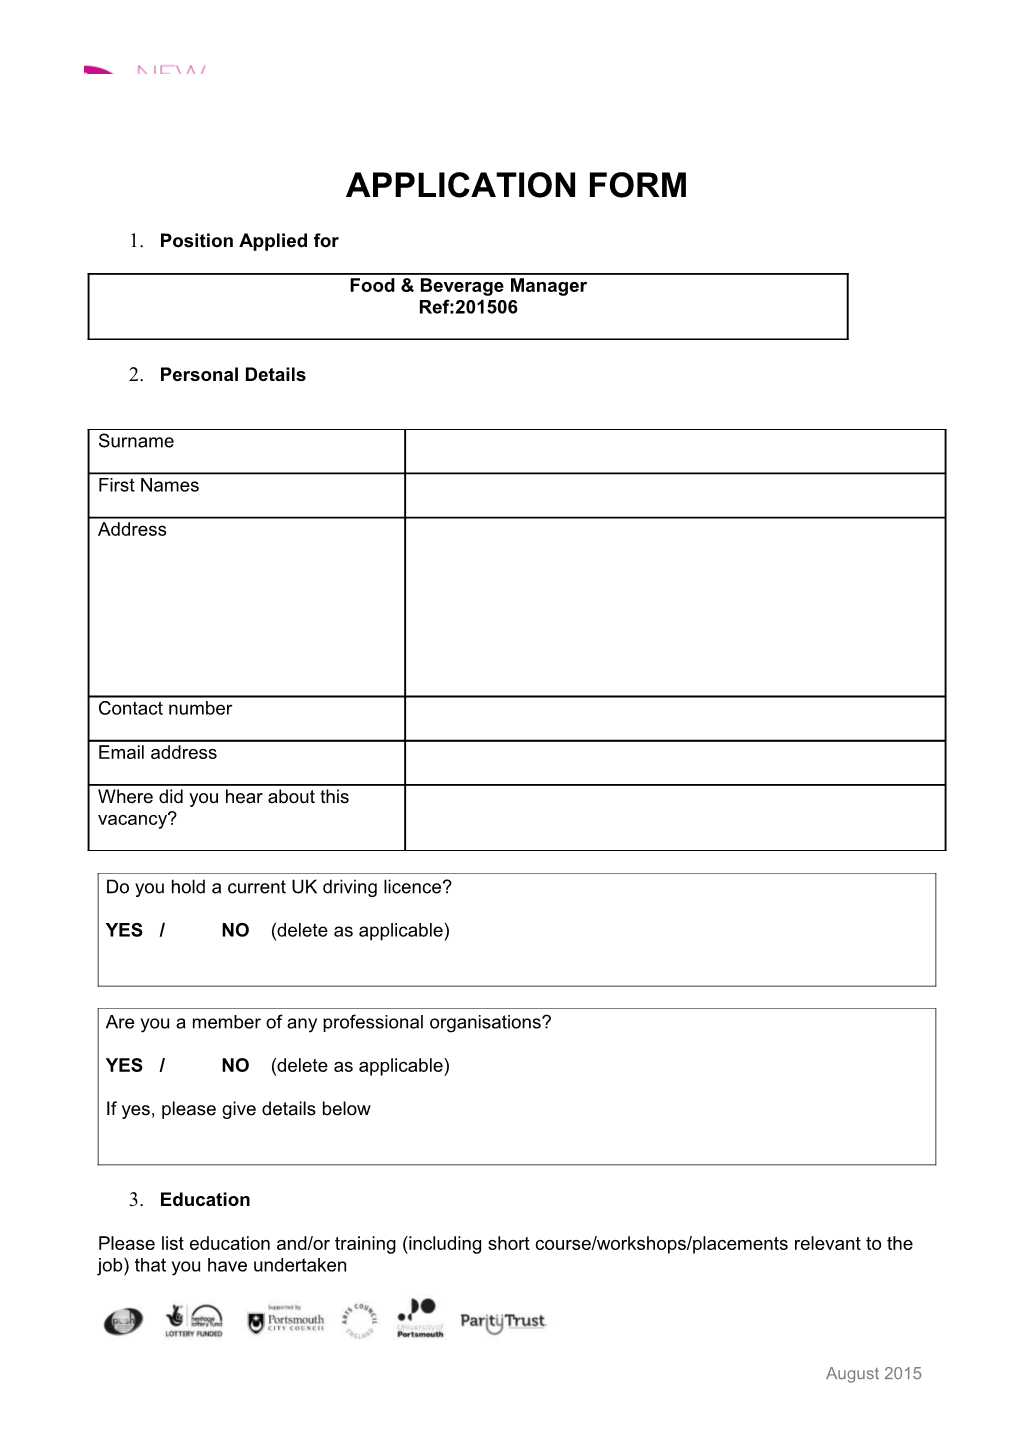 Application Form s78